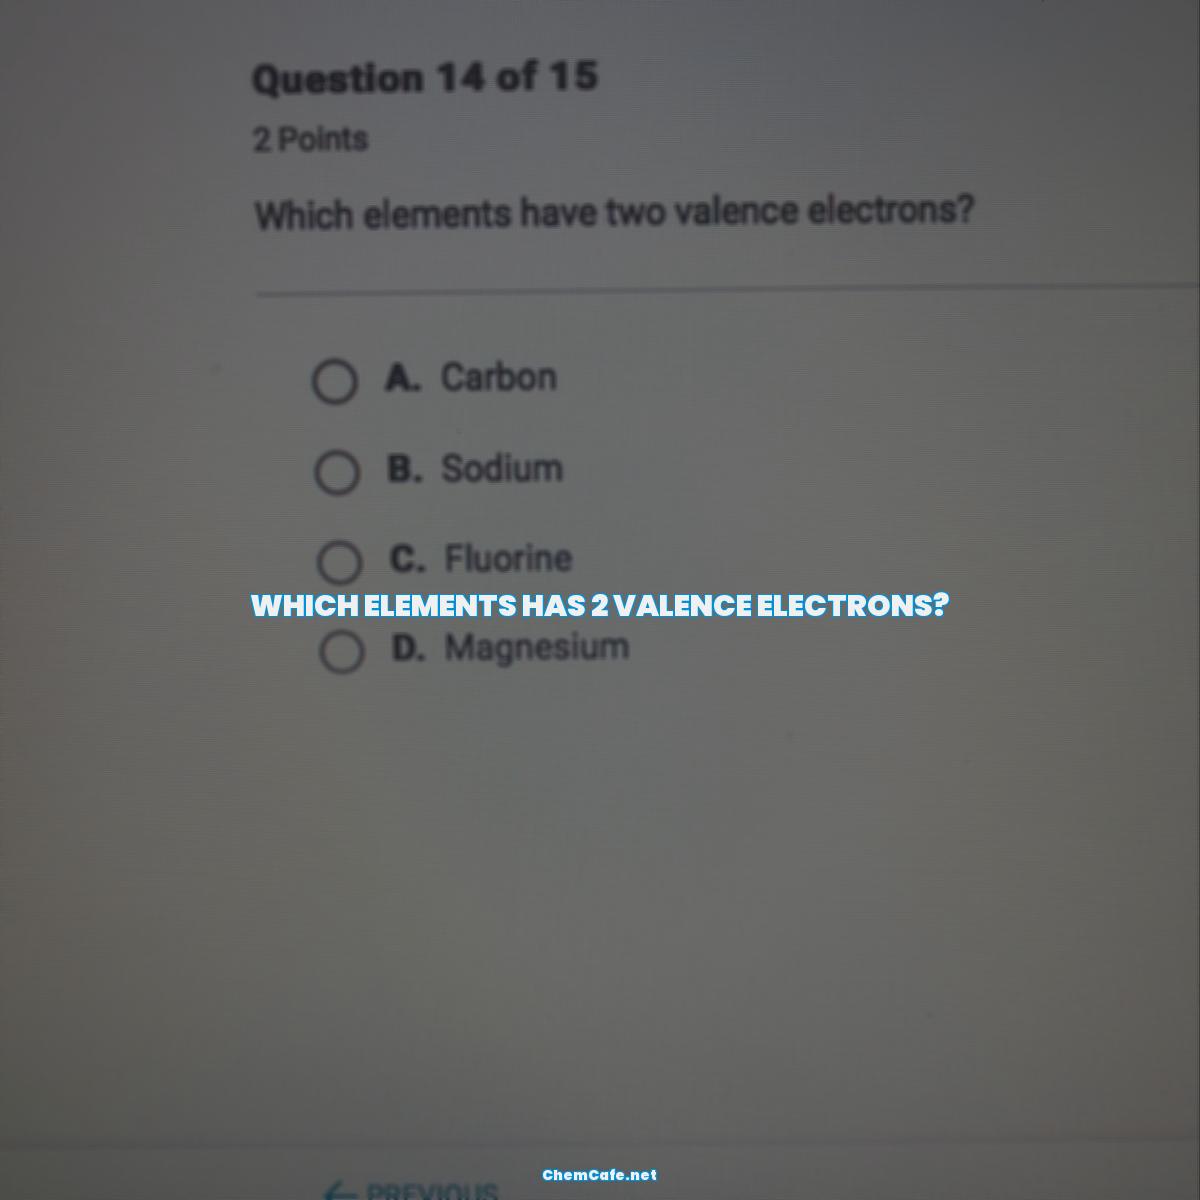 Which elements has 2 valence electrons?